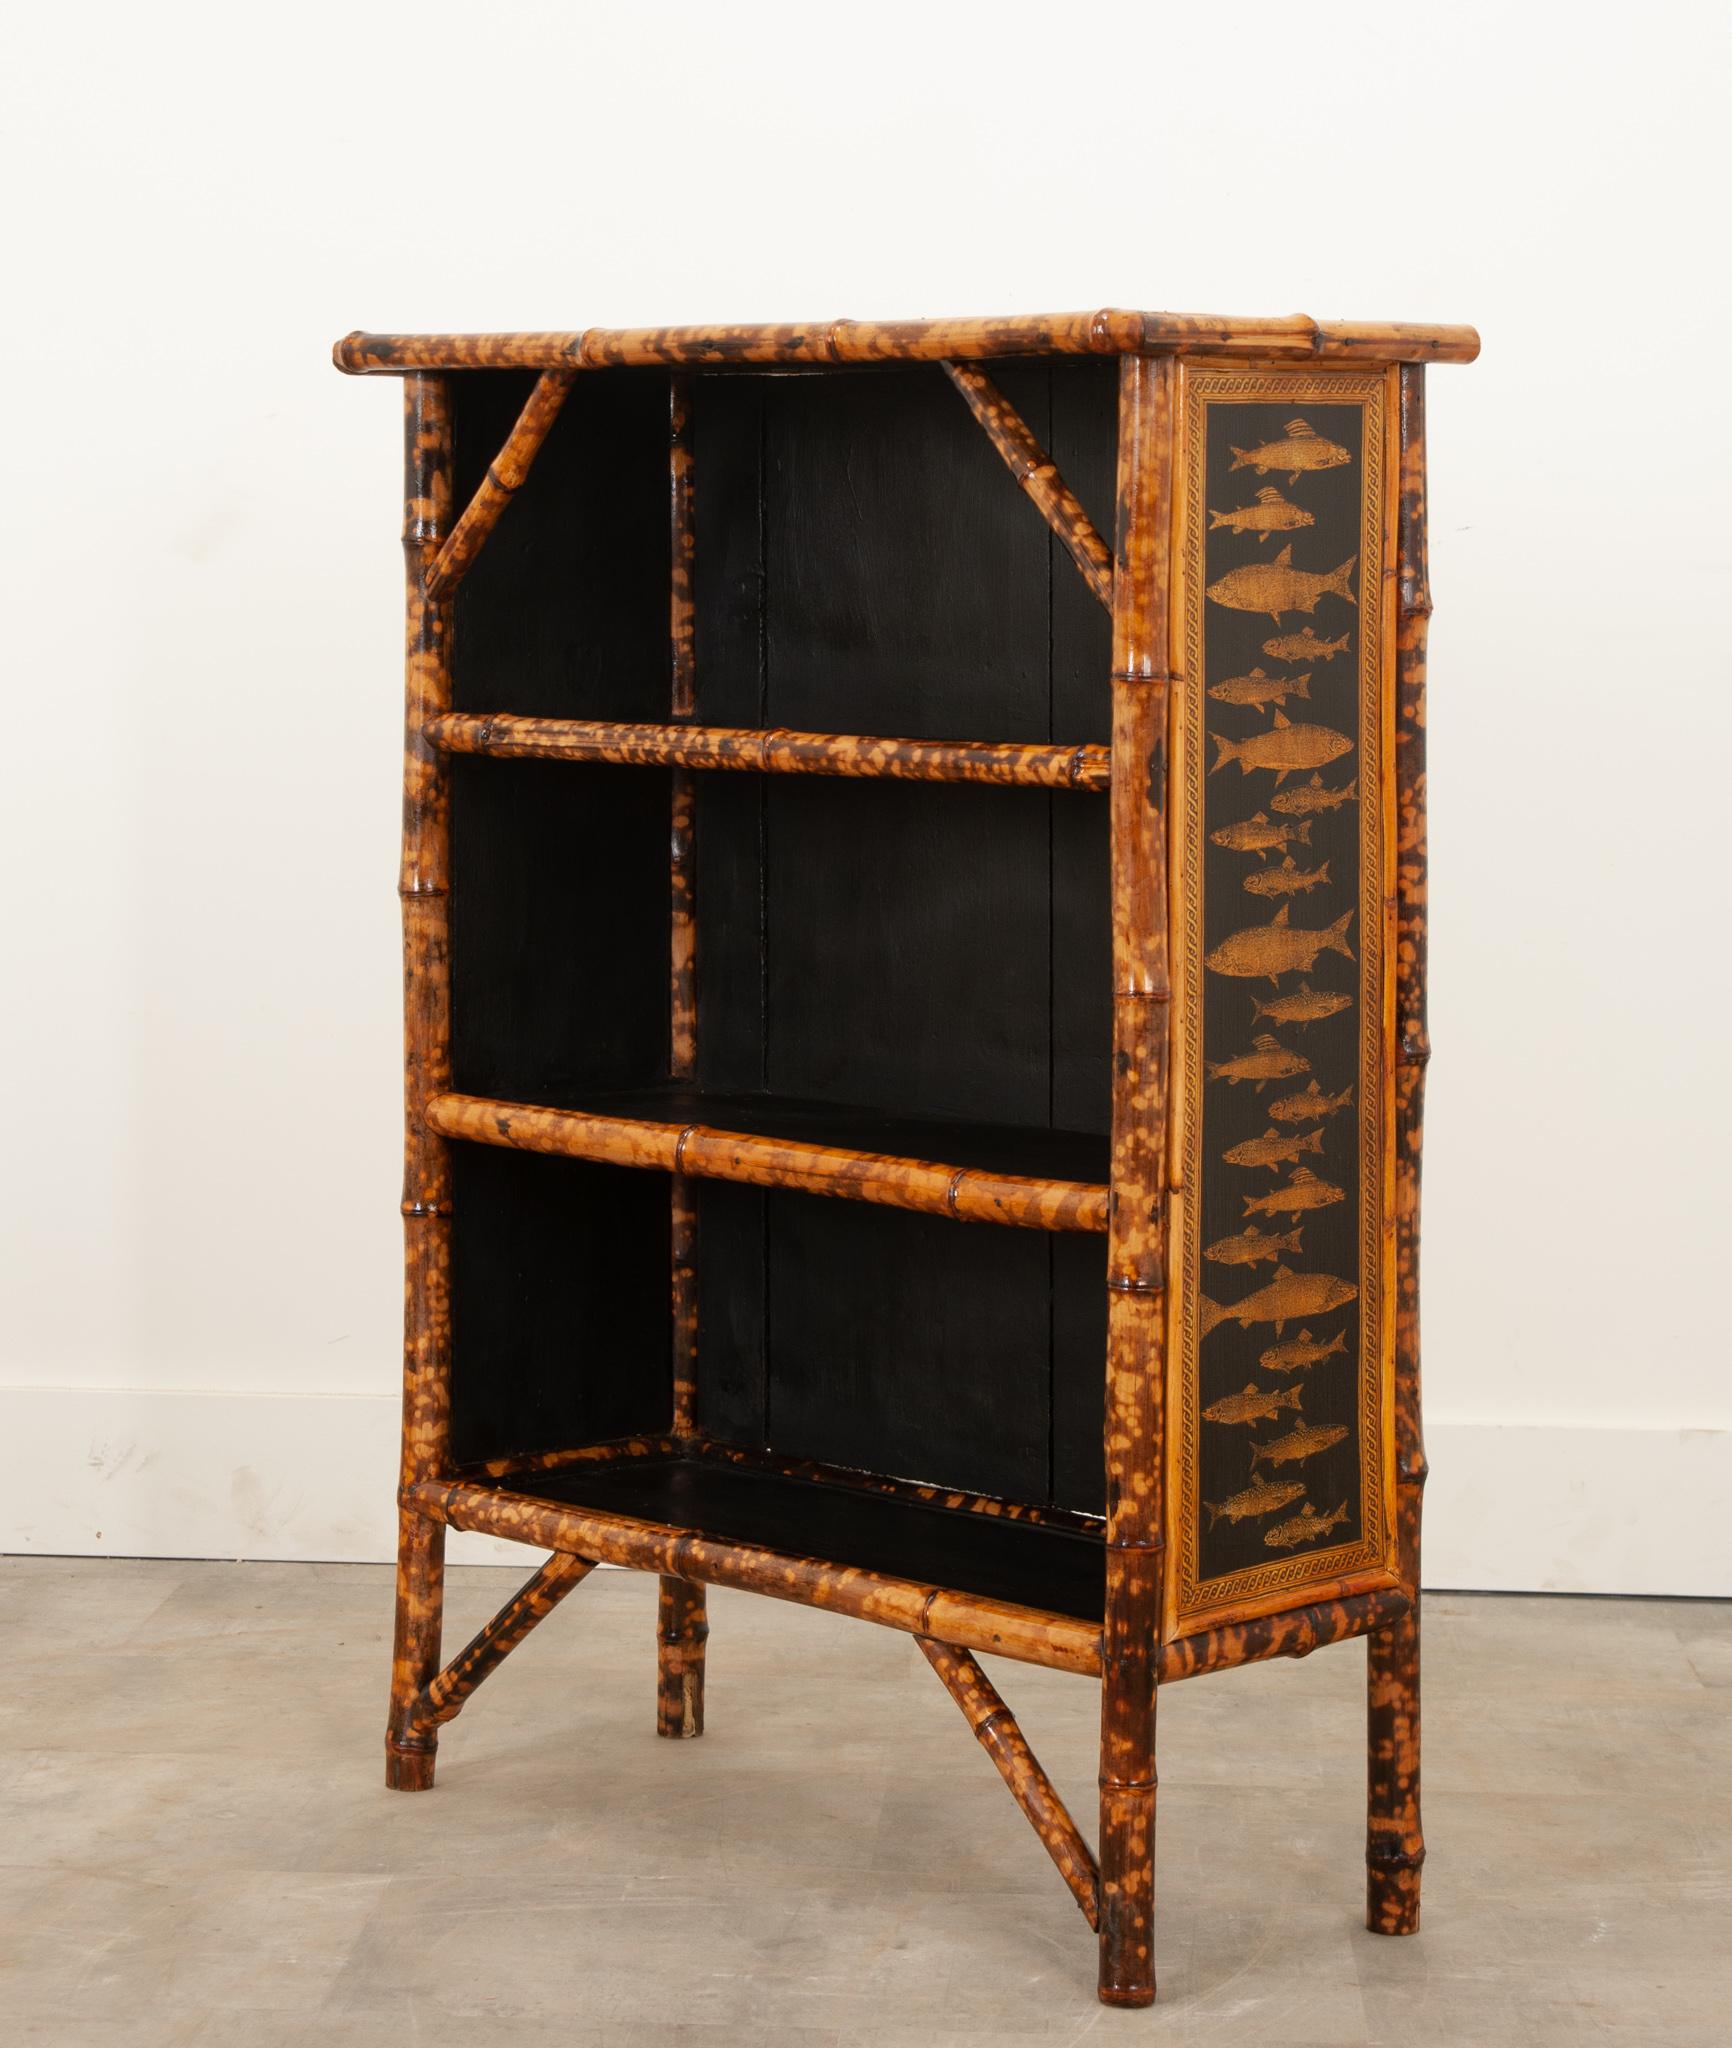 A bamboo bookcase, made in England at the end of the 19th century. The shelves were once topped with woven seagrass that has been removed due to excess wear. It has been replaced with fresh black paint and brilliant découpage paper fish and styled